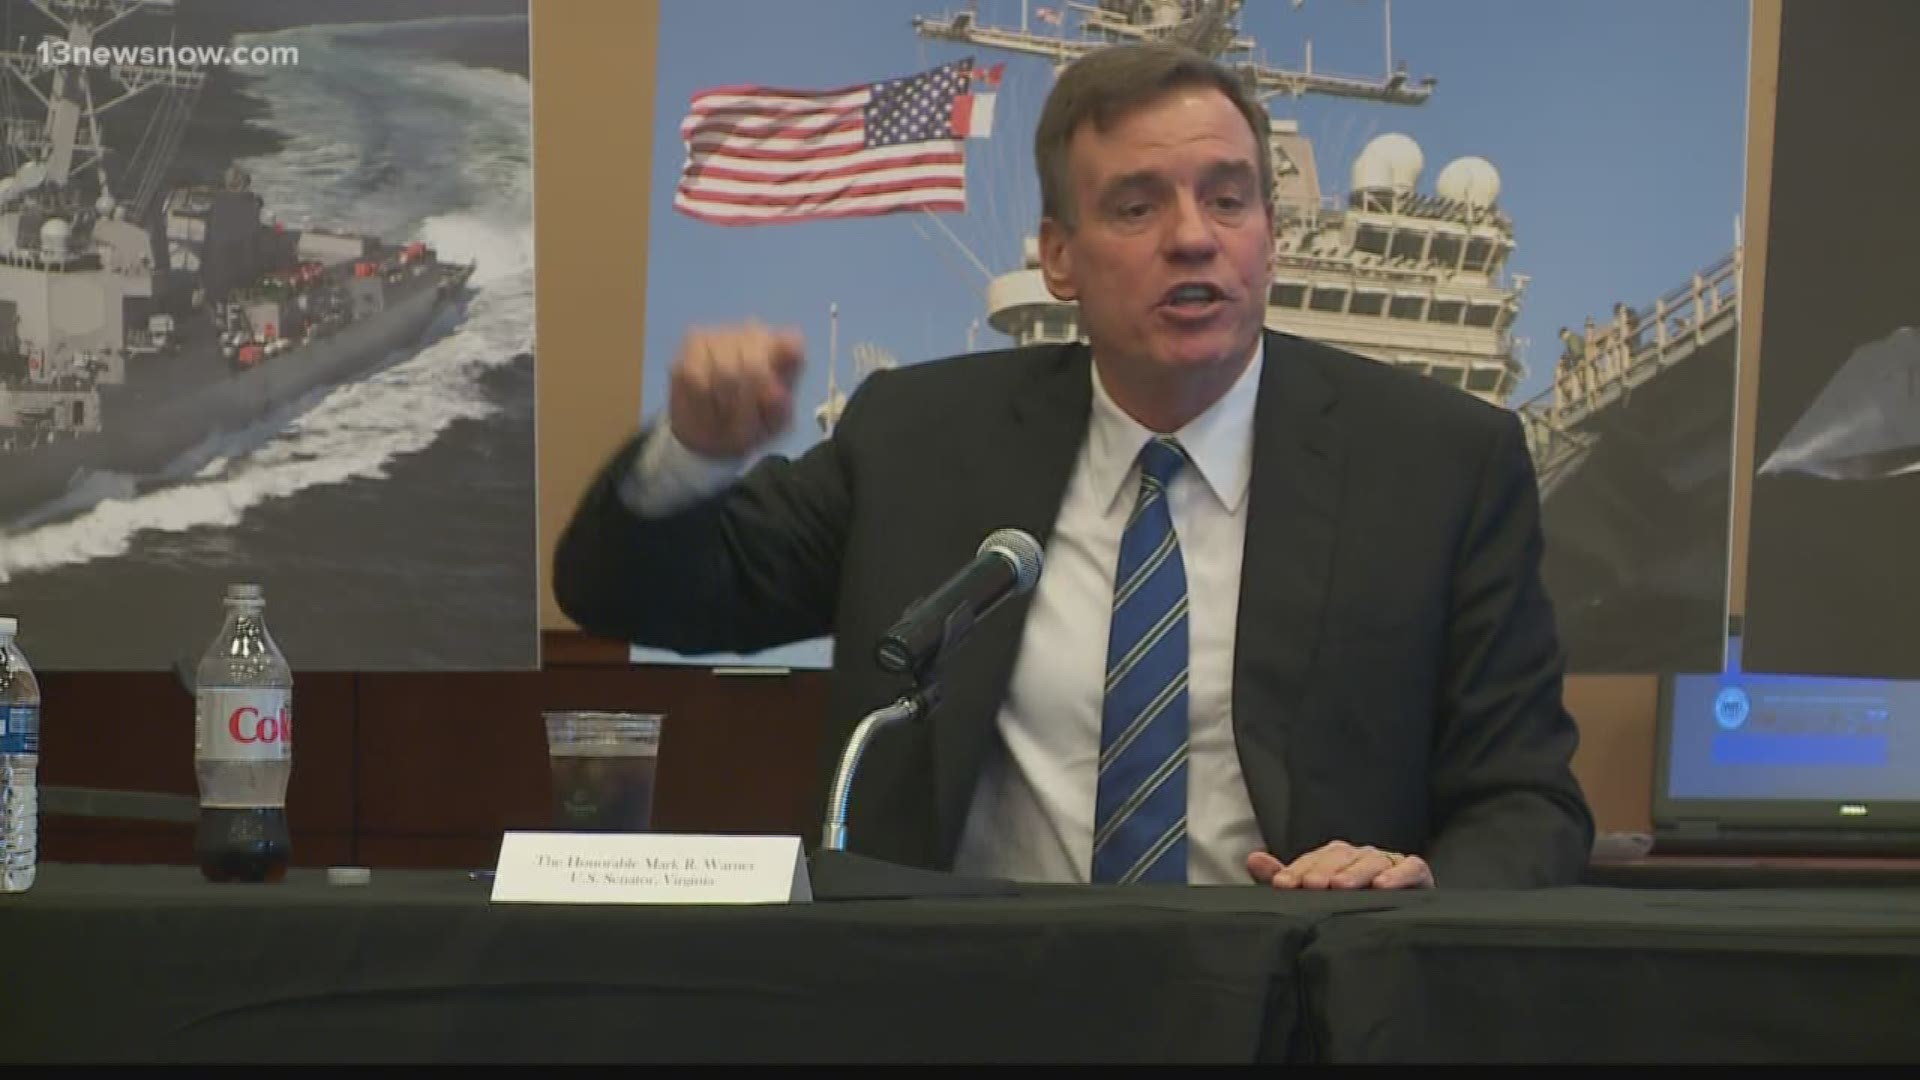 Senator Mark Warner made a stop in Norfolk today to address issues affecting the military community right here in Hampton Roads.